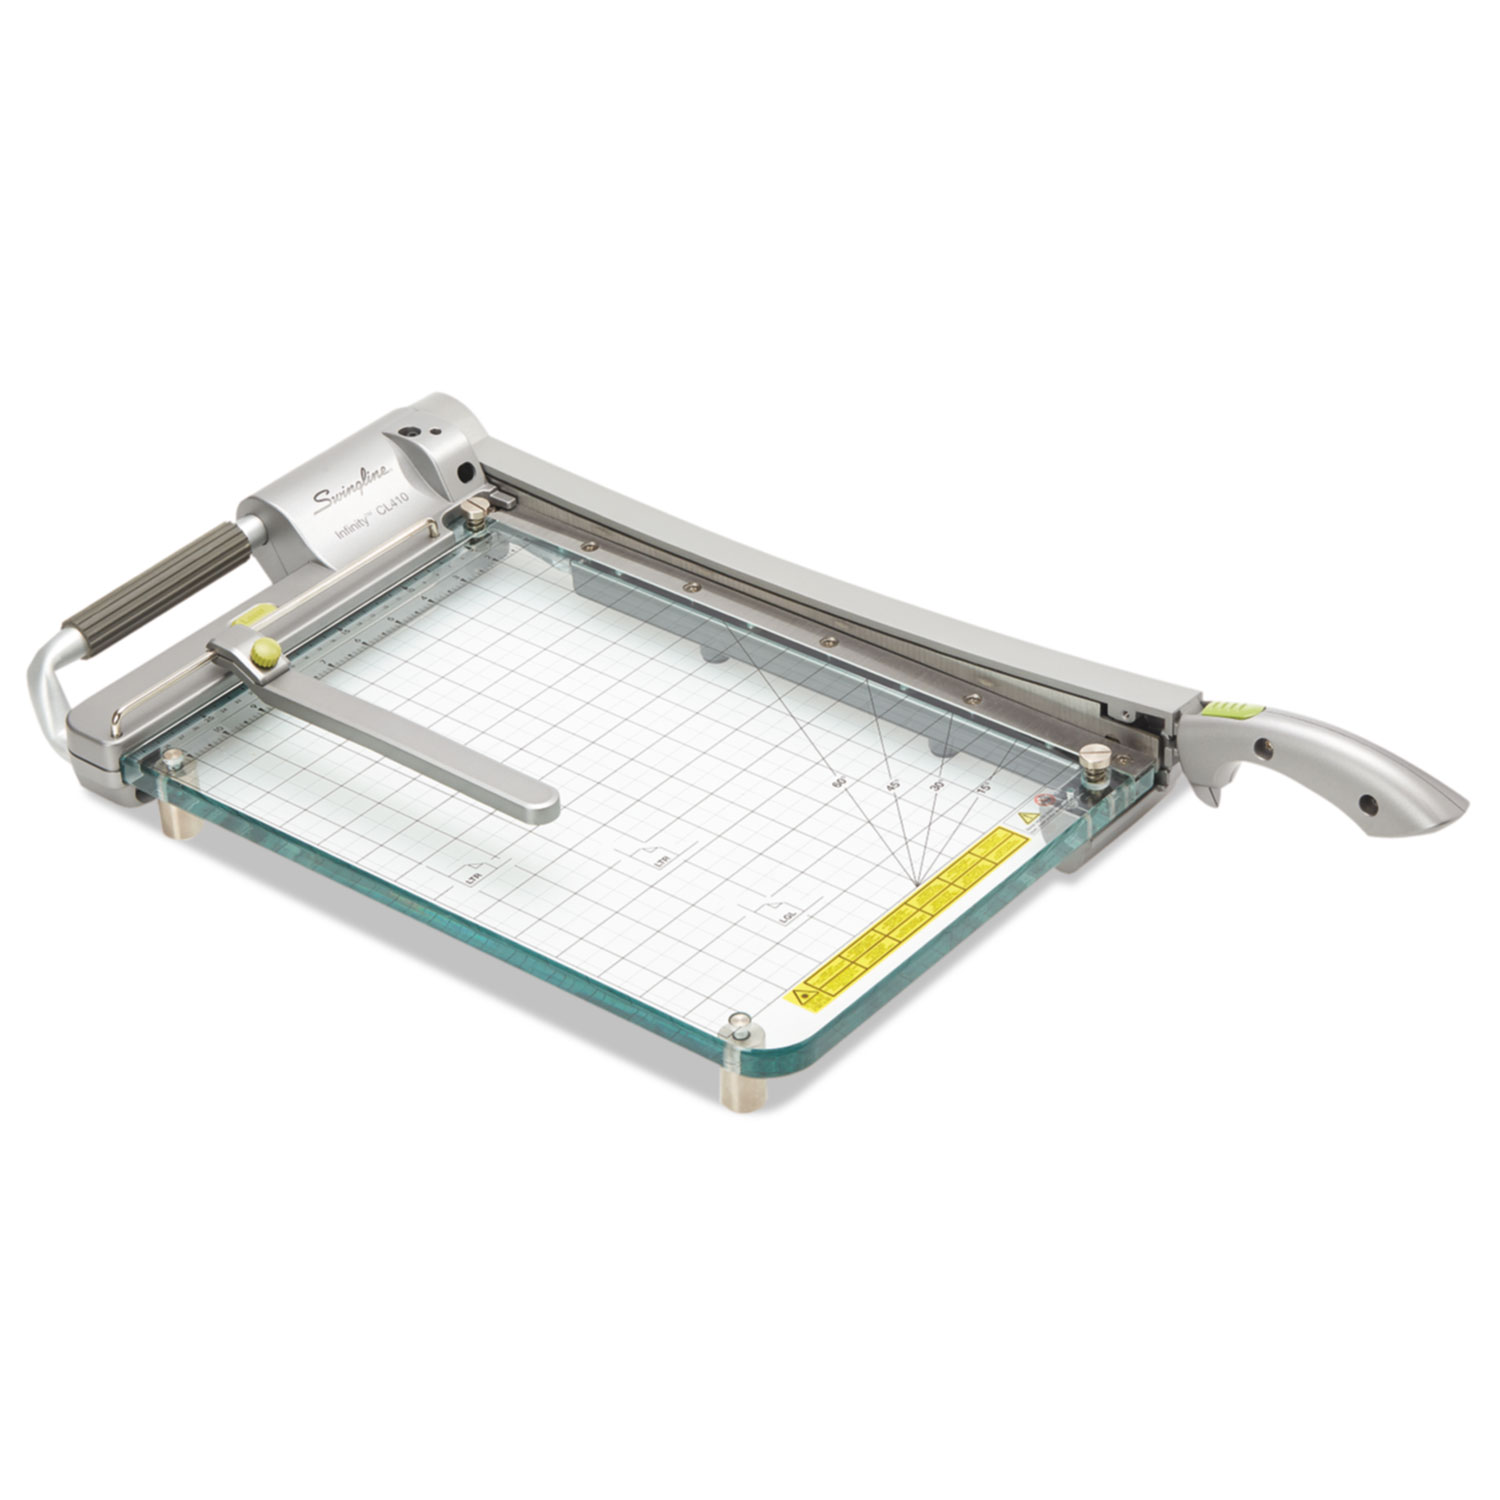 Infinity Guillotine Trimmer, Model CL410, 25 Sheets, 15 1/4 Cut Length